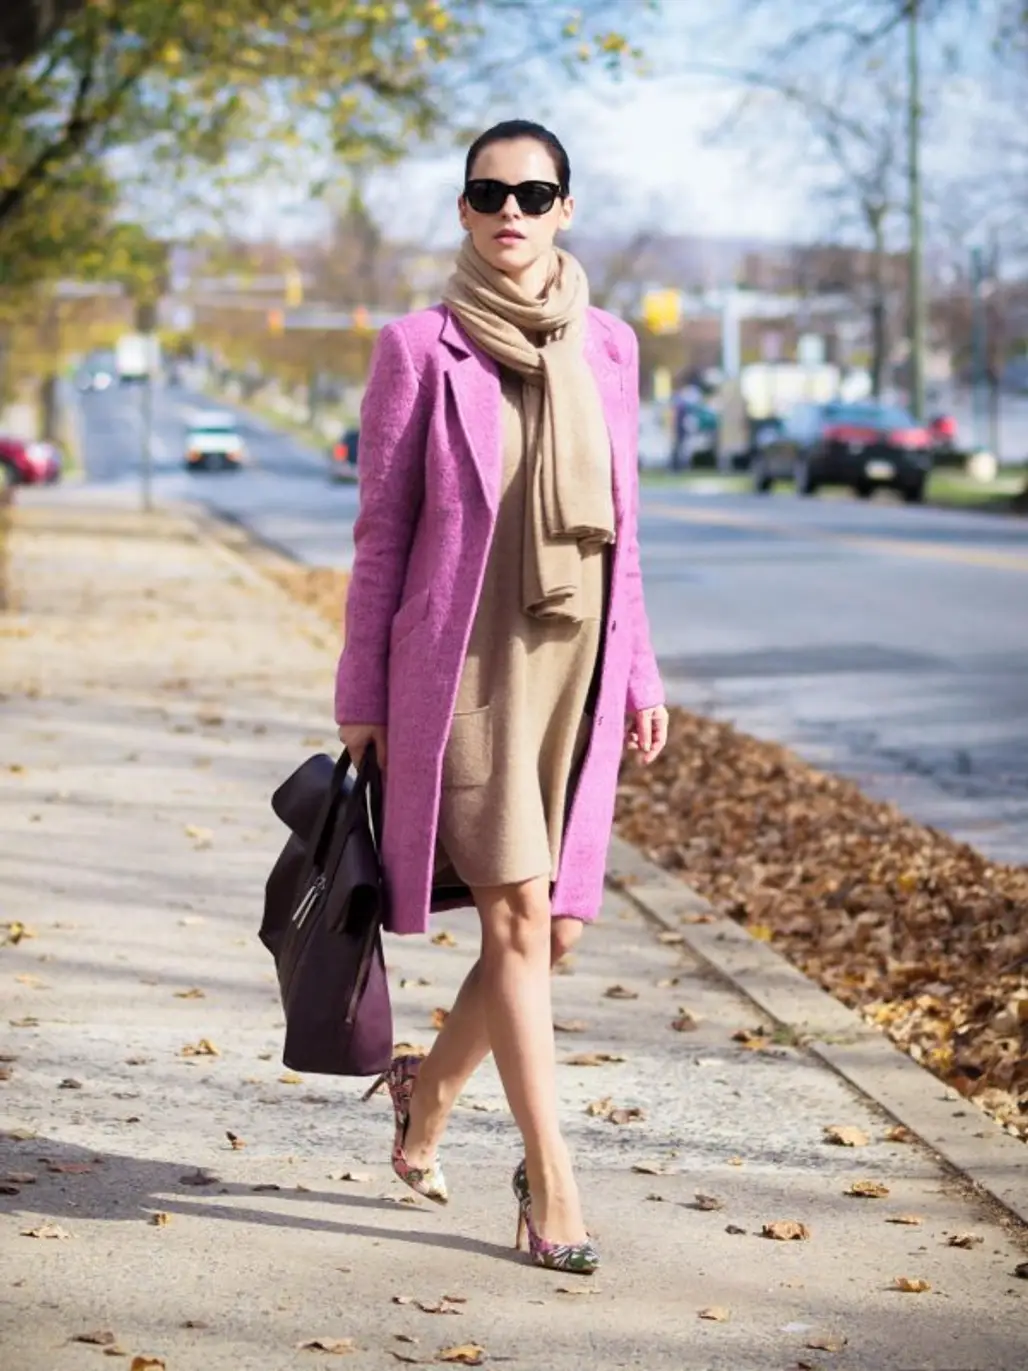 Statement Jacket and a Cashmere Scarf